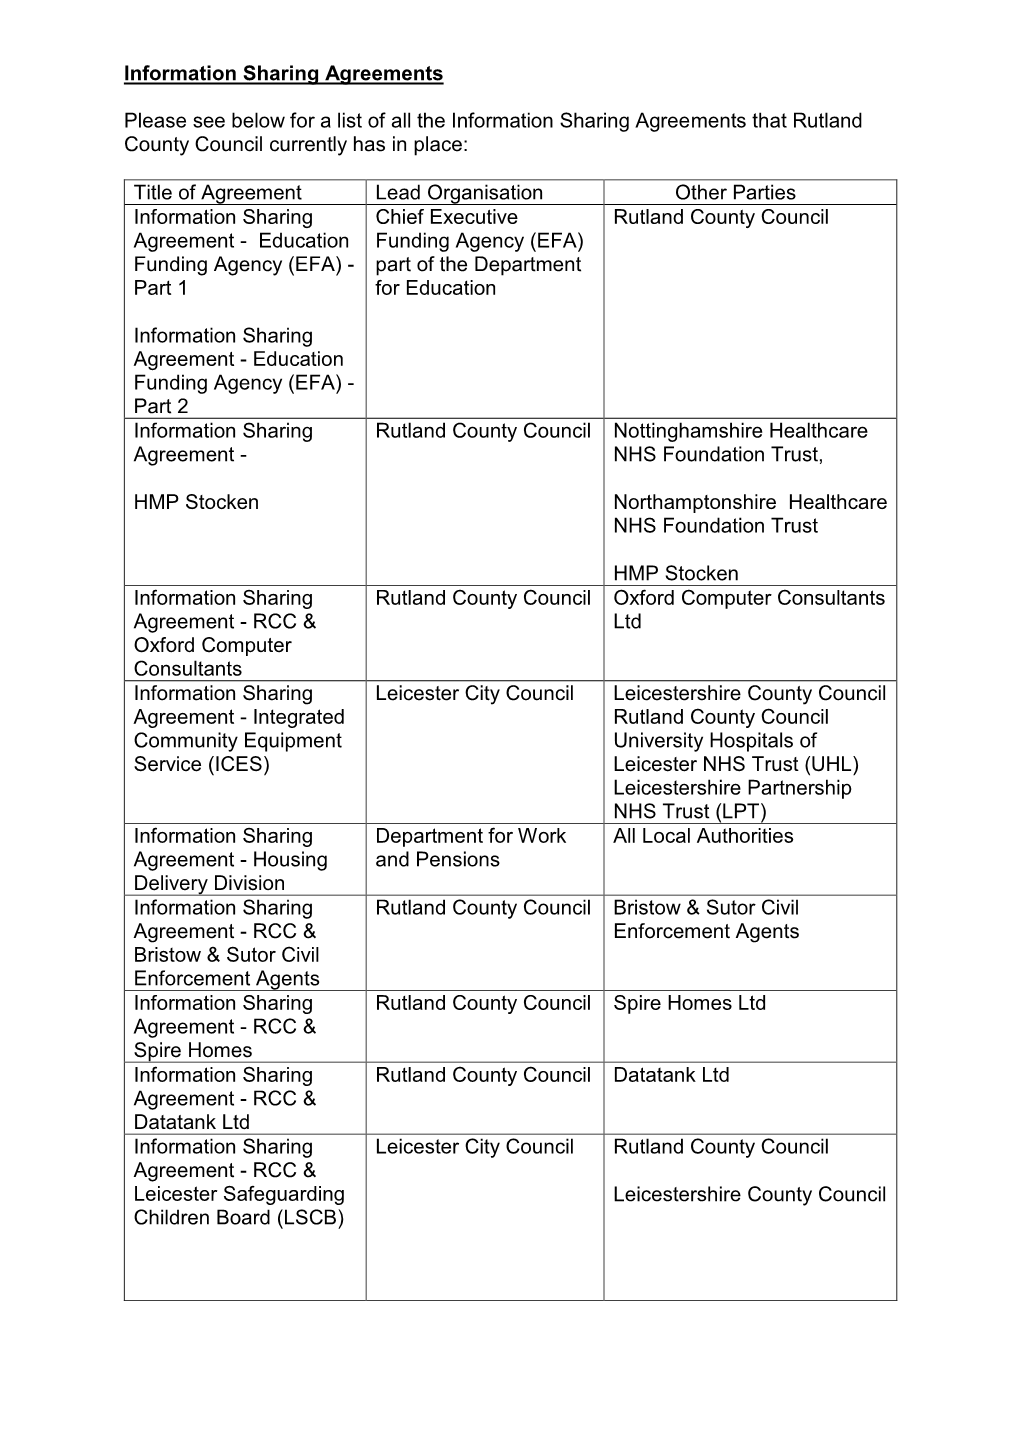 Information Sharing Agreements Please See Below for a List of All the Information Sharing Agreements That Rutland County Council